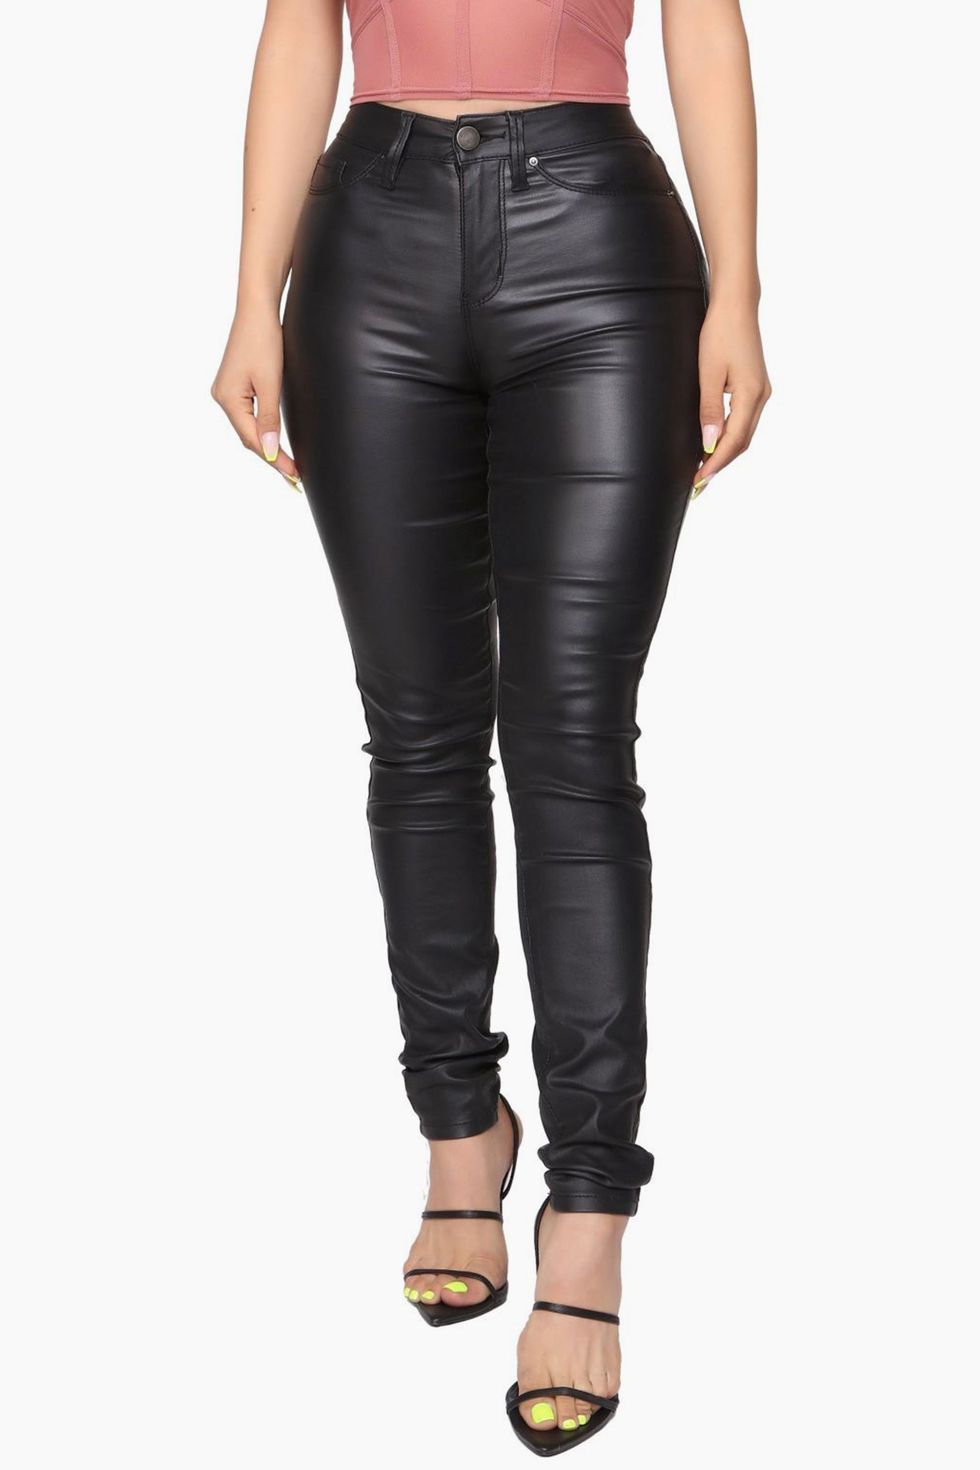 Women Black Leather Pants/ High Waisted Leather Leggings for Women/ Black  Leggings for Women -  Canada